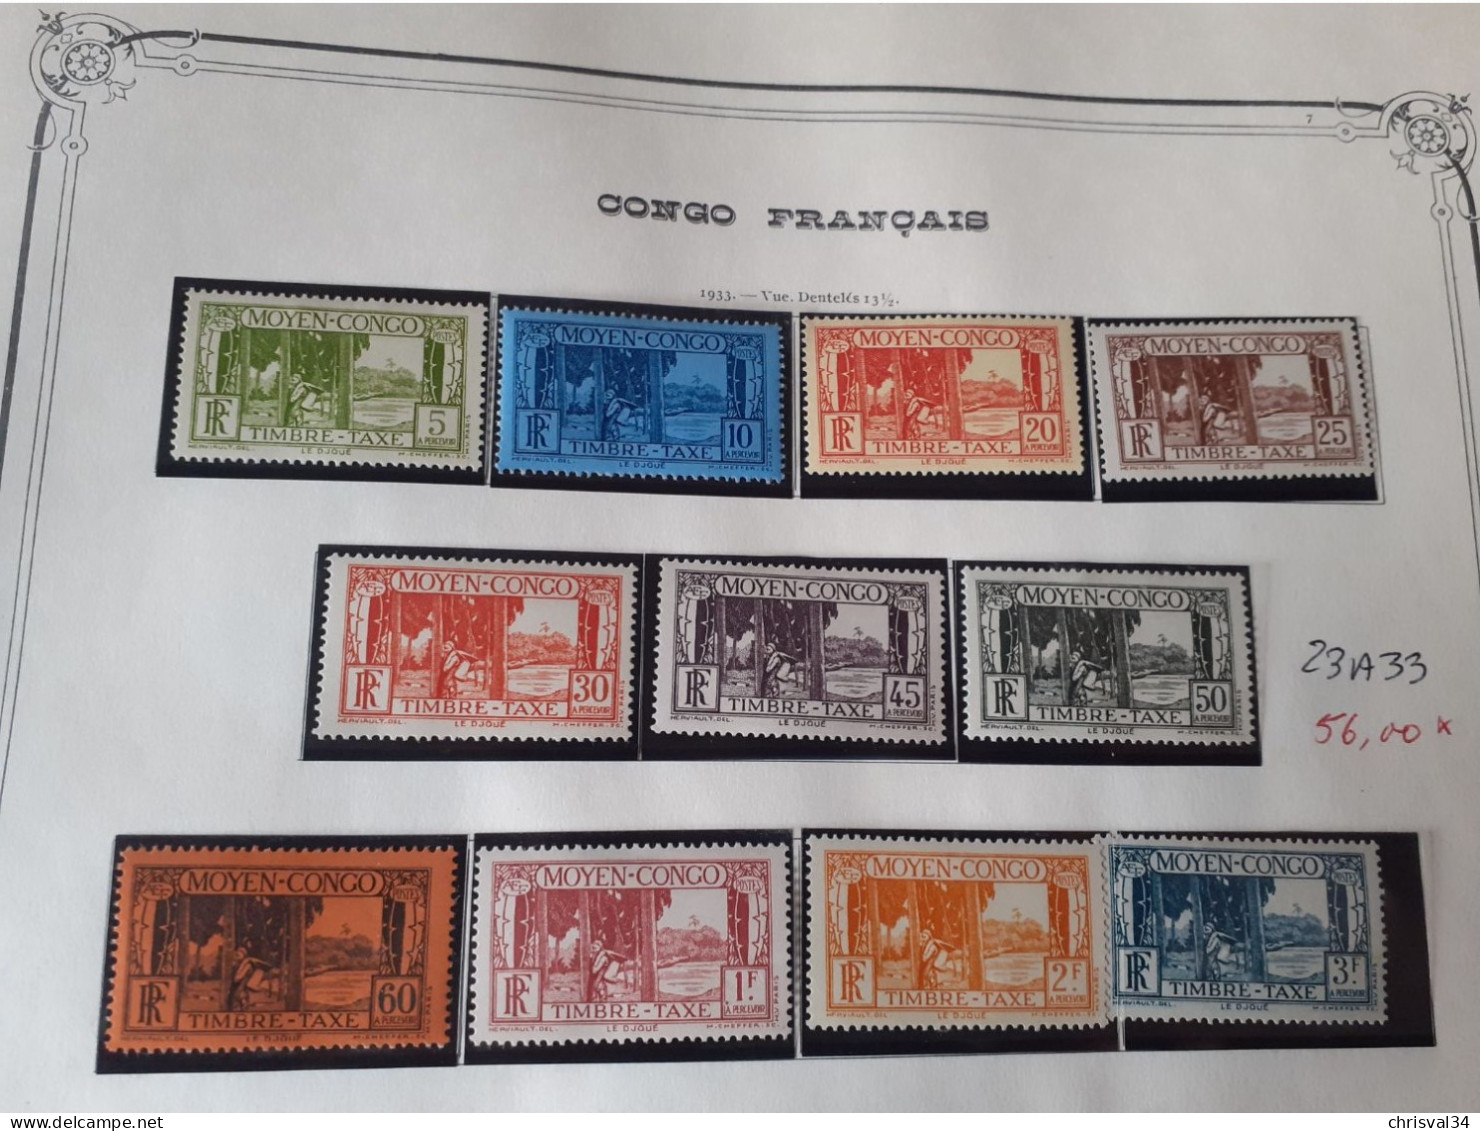 TIMBRES  CONGO SERIE  TAXE   N  23  A  33     COTE  56,00  EUROS    NEUFS  TRACE  CHARNIERES - Unused Stamps